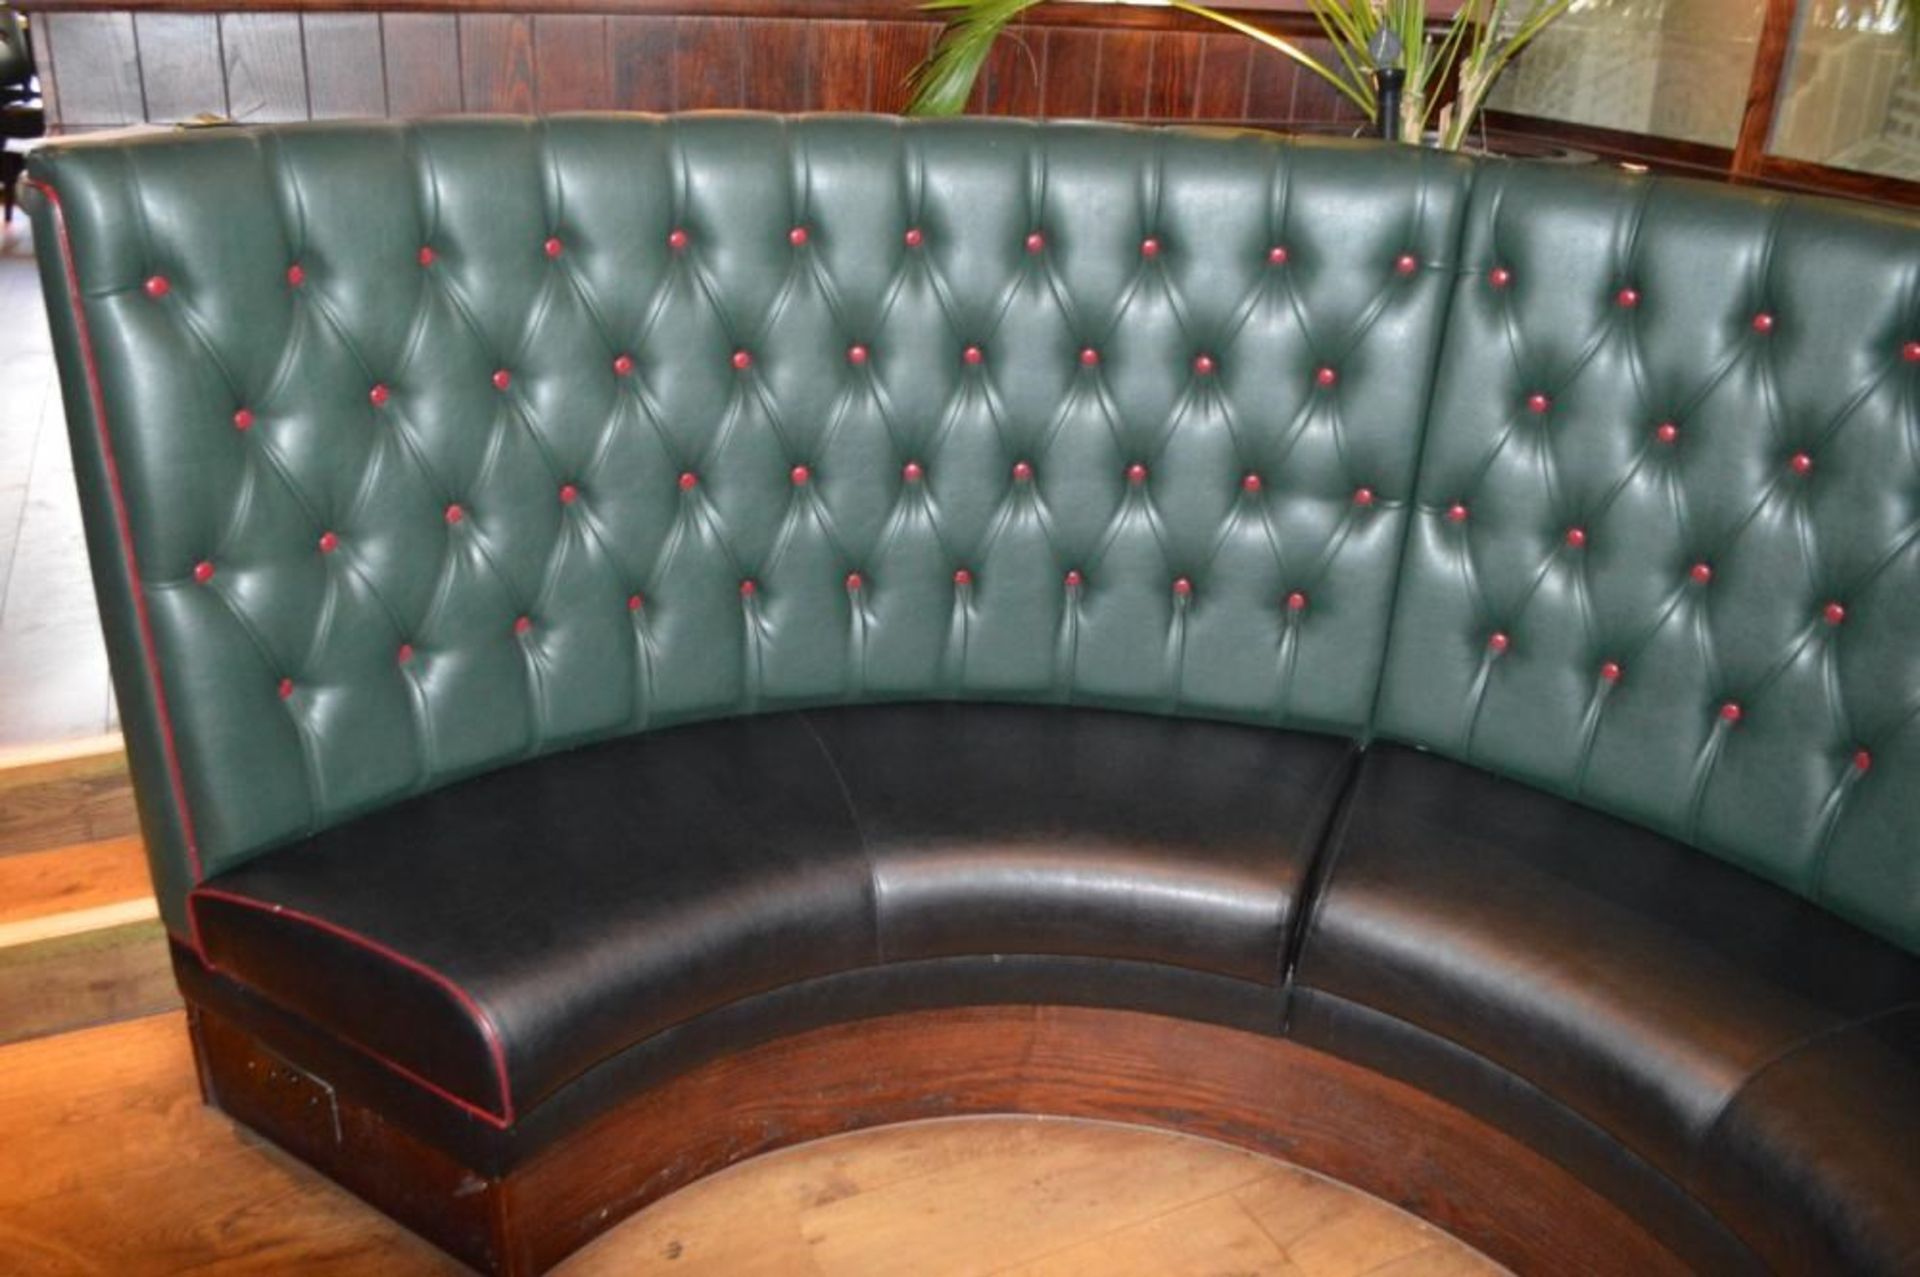 1 x Contemporary U Shape Seating Booth - Features a Leather Upholstery With Green Studded Backrests, - Image 2 of 10